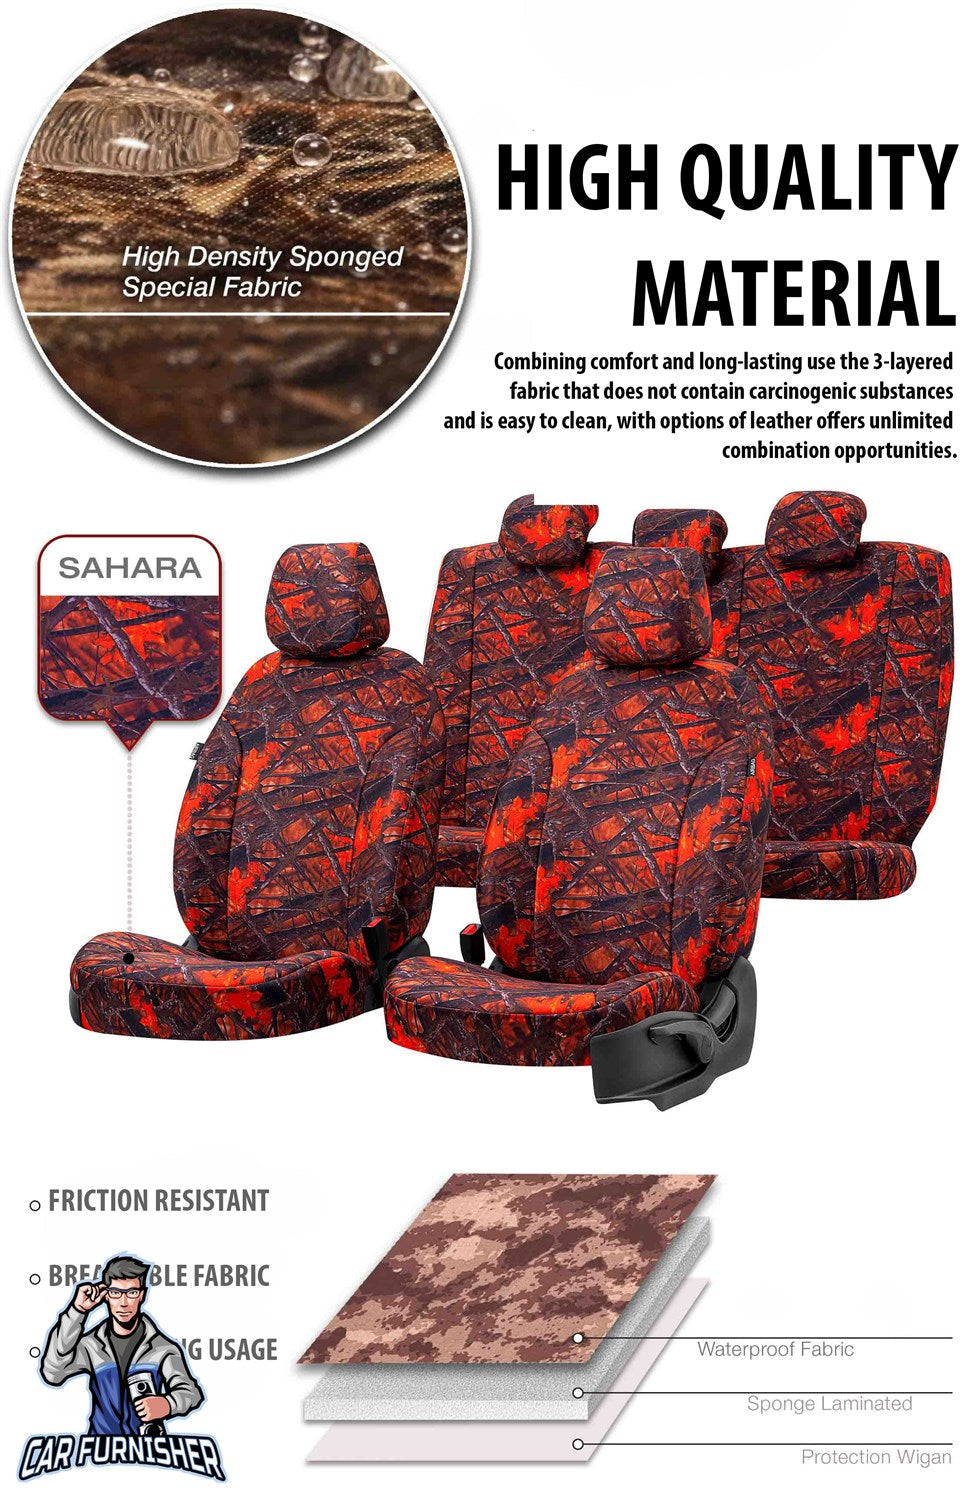 Volvo S60 Car Seat Cover 2000-2018 T4/T5/T6/T8/D5 Camouflage Everest Camo Full Set (5 Seats + Handrest) Fabric